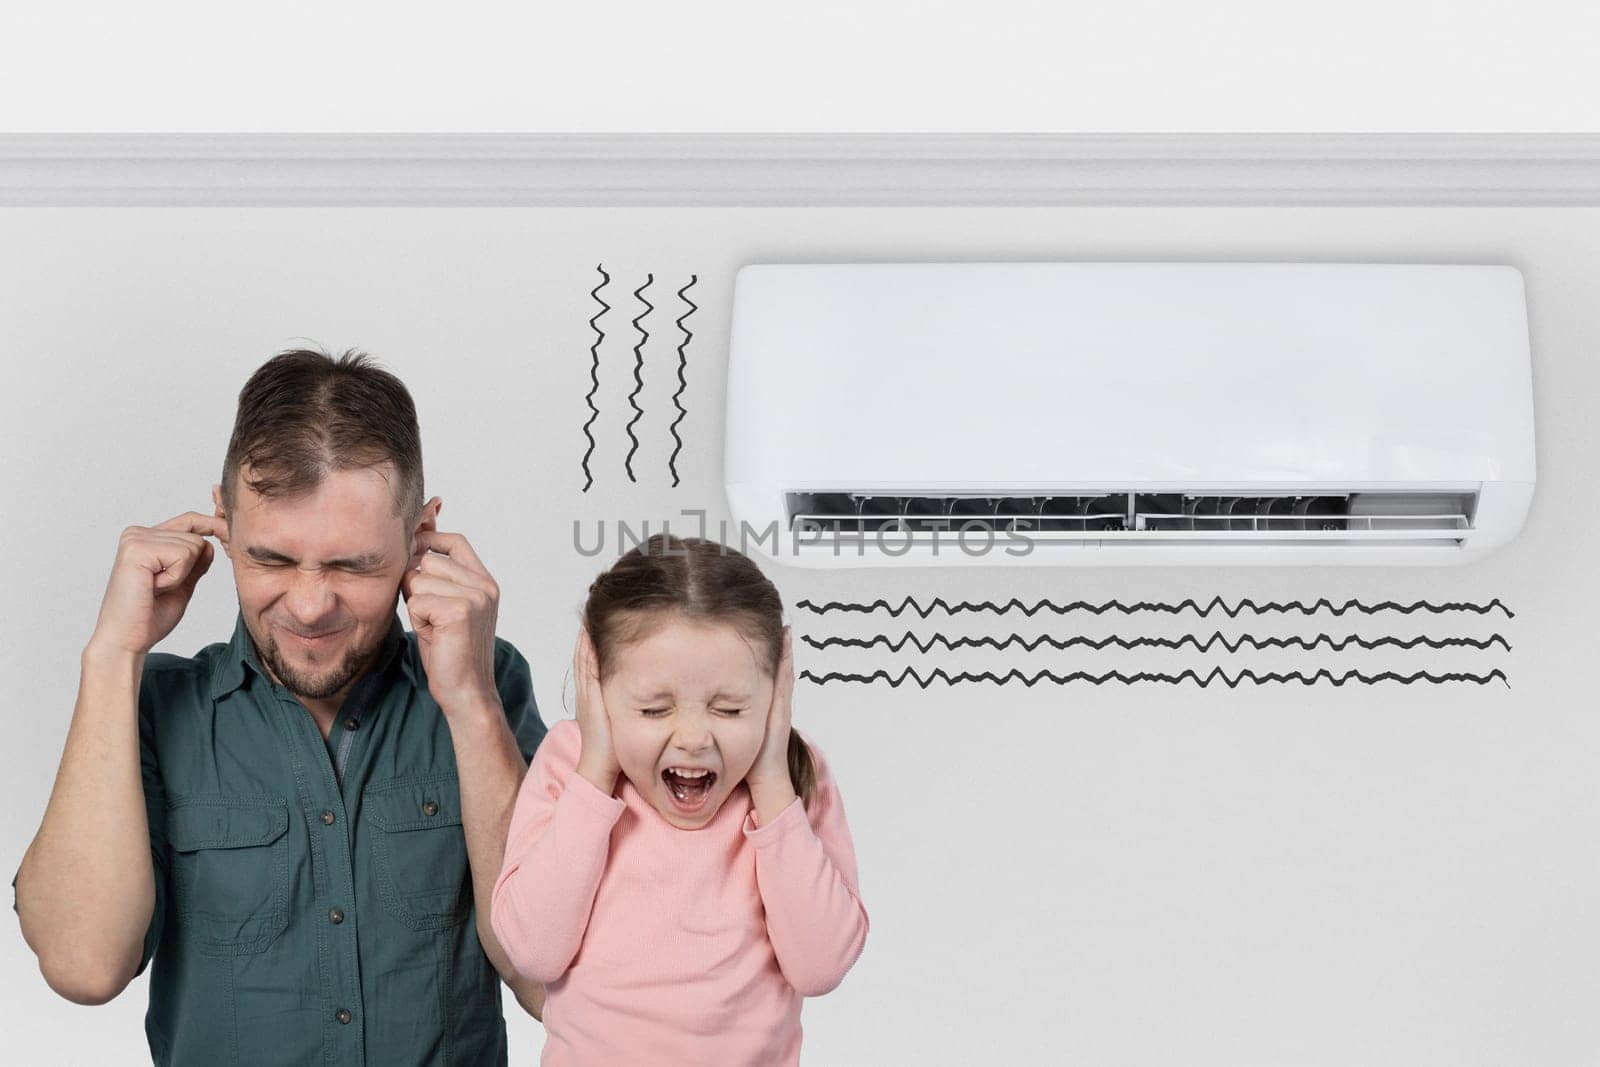 The air conditioner makes loud sounds, noises and vibrations. Father with child close their ears by Rom4ek